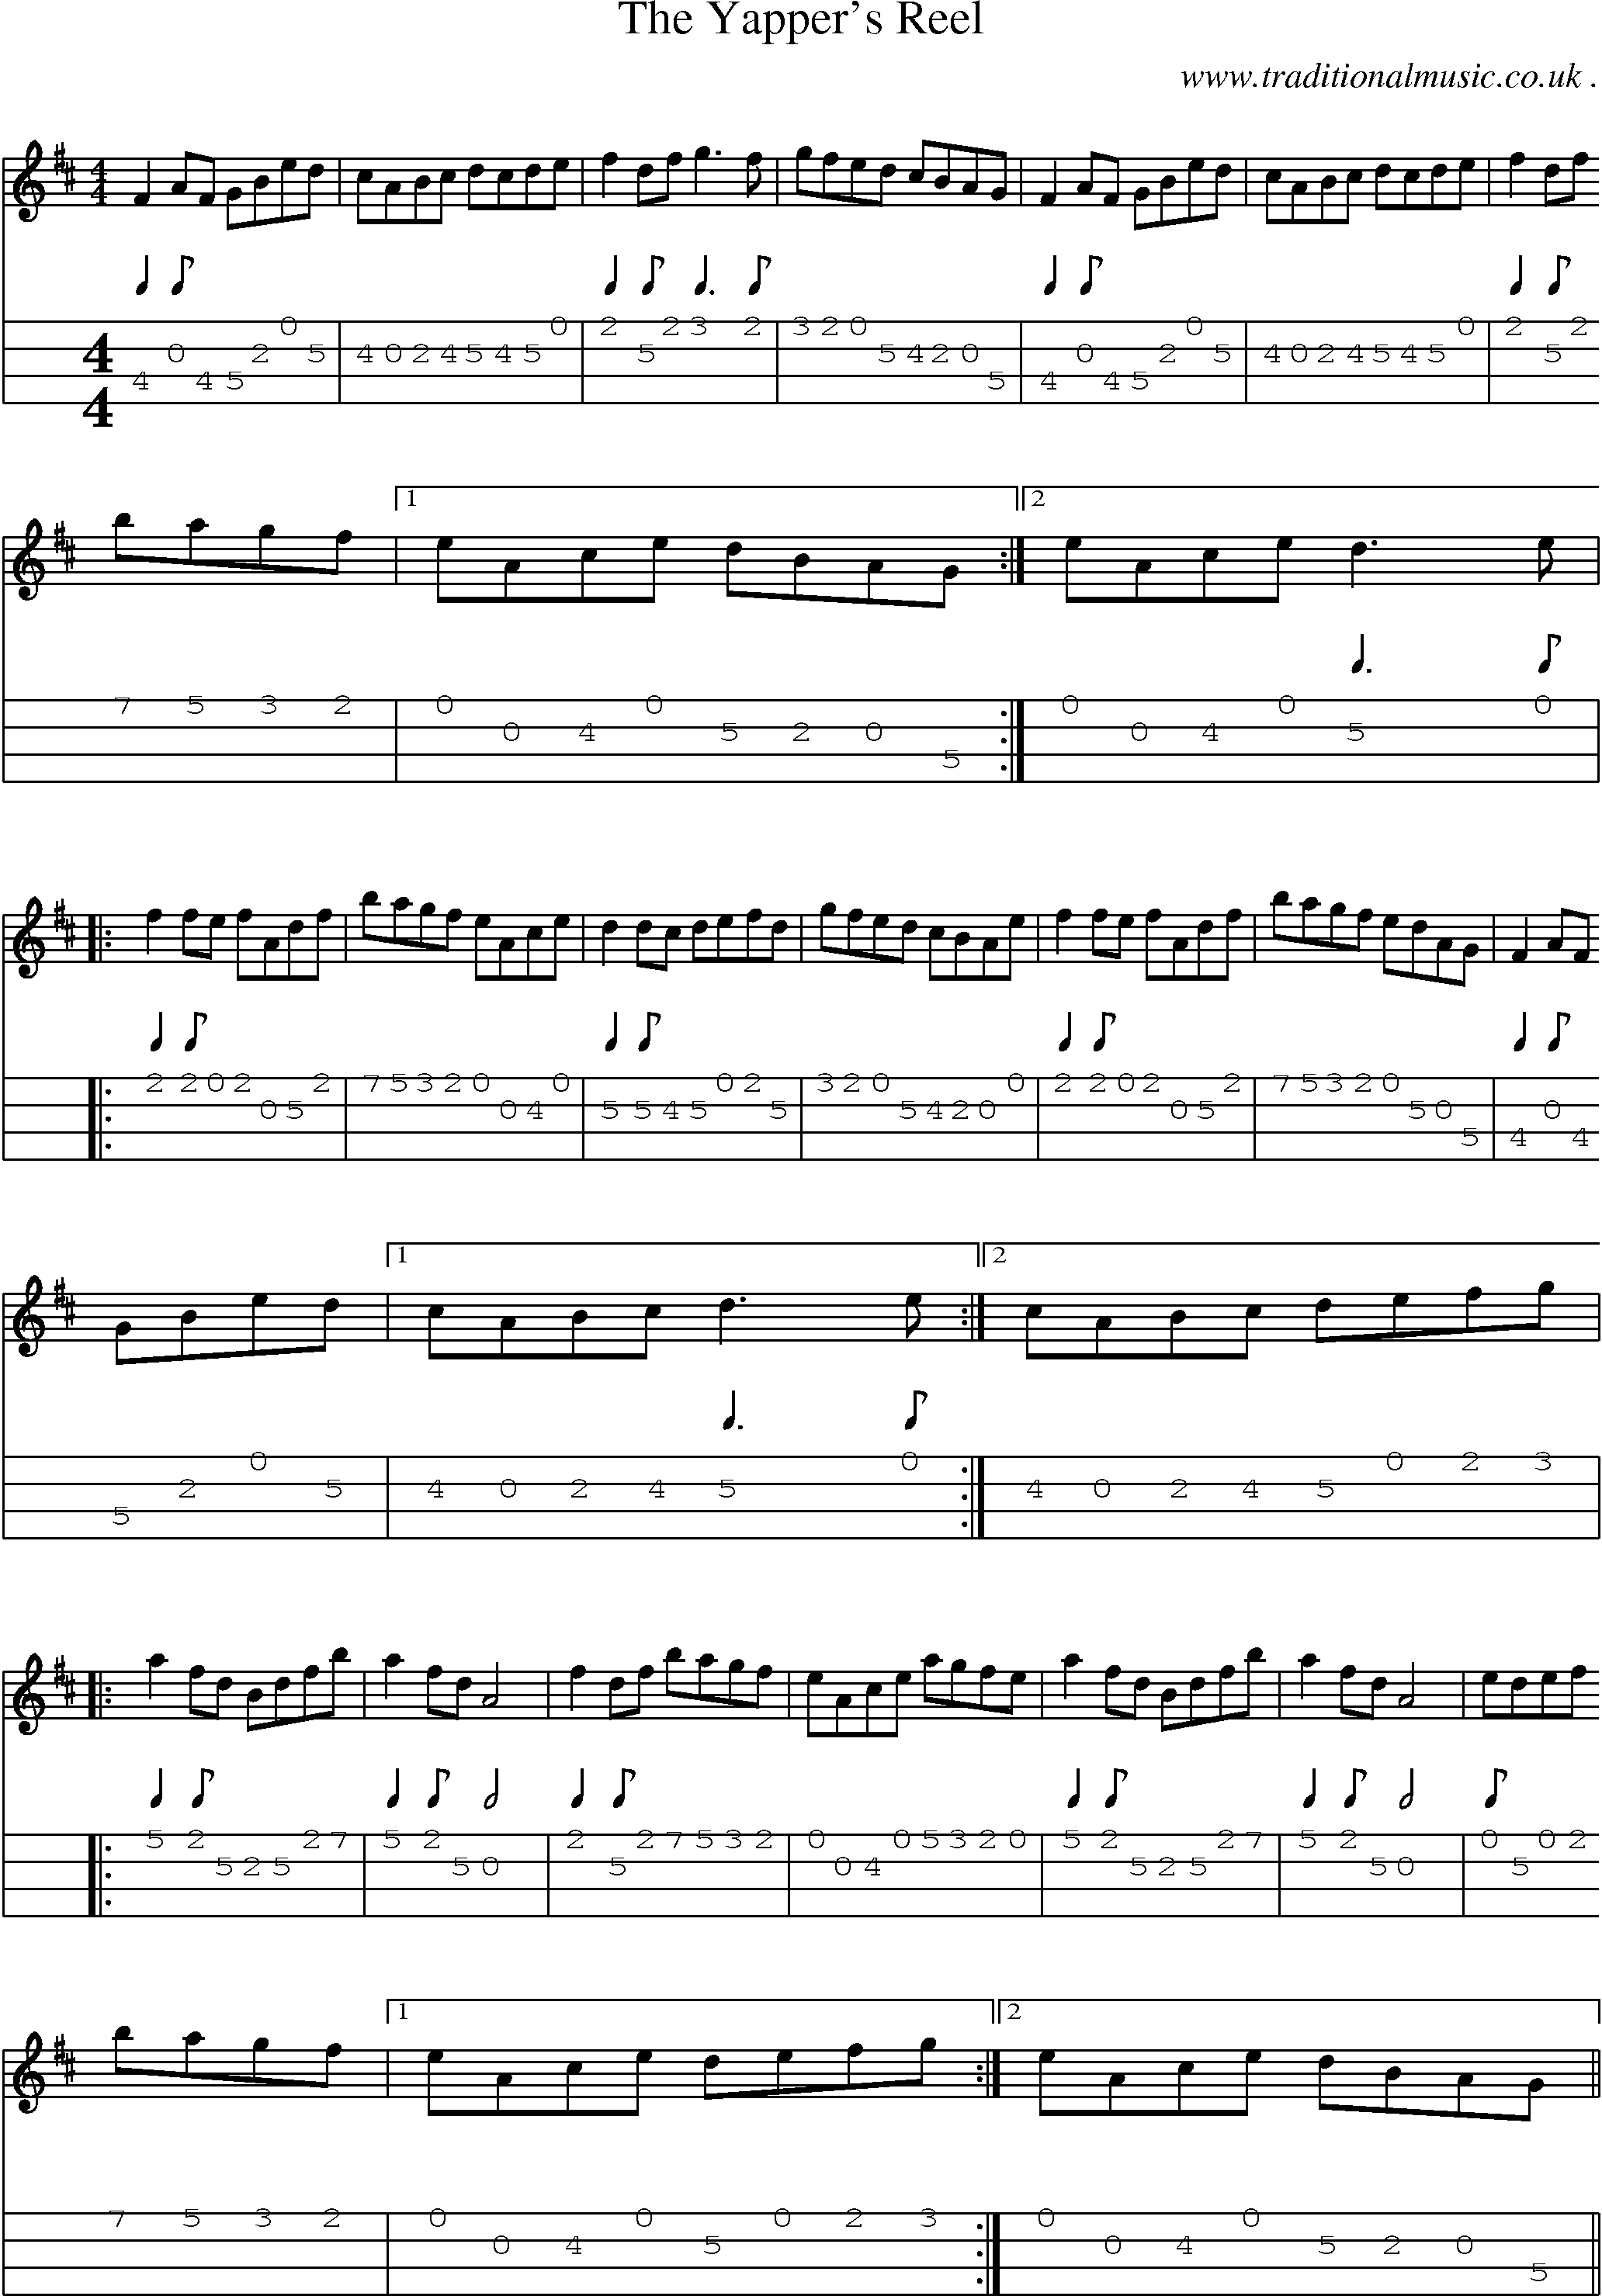 Sheet-Music and Mandolin Tabs for The Yappers Reel